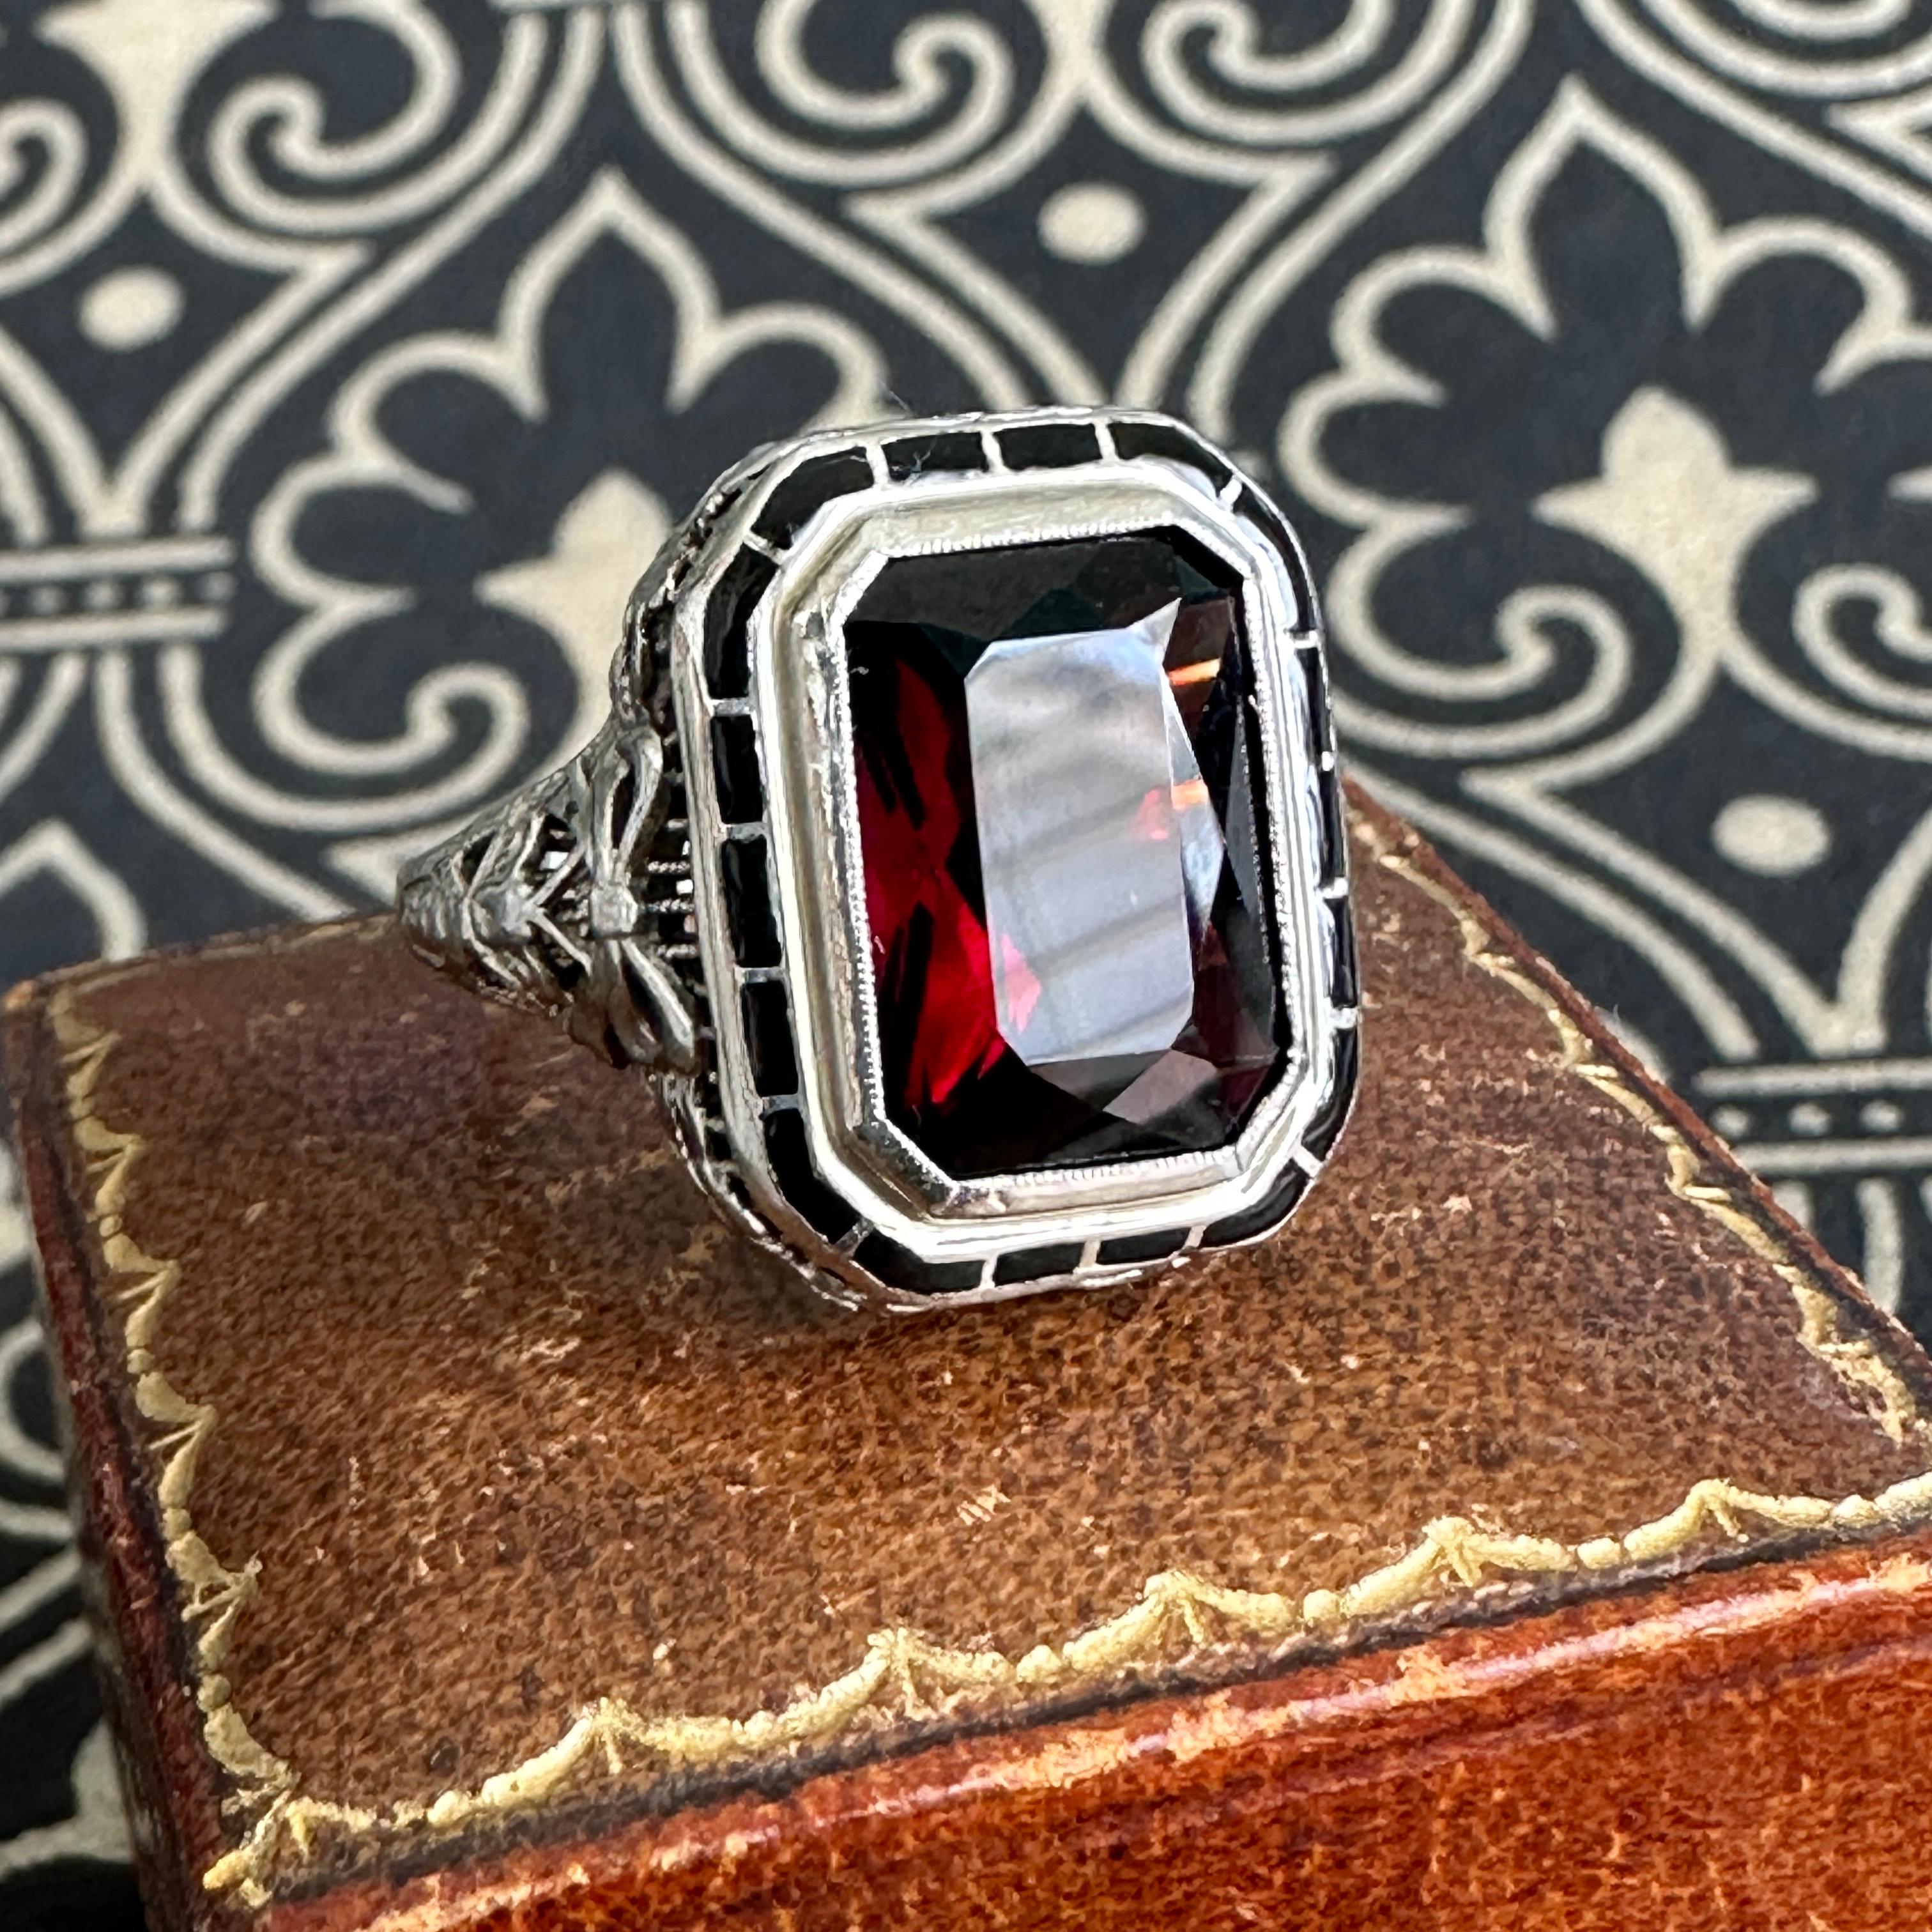 Details: 
A beautiful garnet ring from the Edwardian Era (ca 1900's) era. This lovely ring is crafted in 14K white gold, with black enamel details around the stone. The stone is a beautiful deep red, and measures garnet measures 13mm x 9.66mm. The